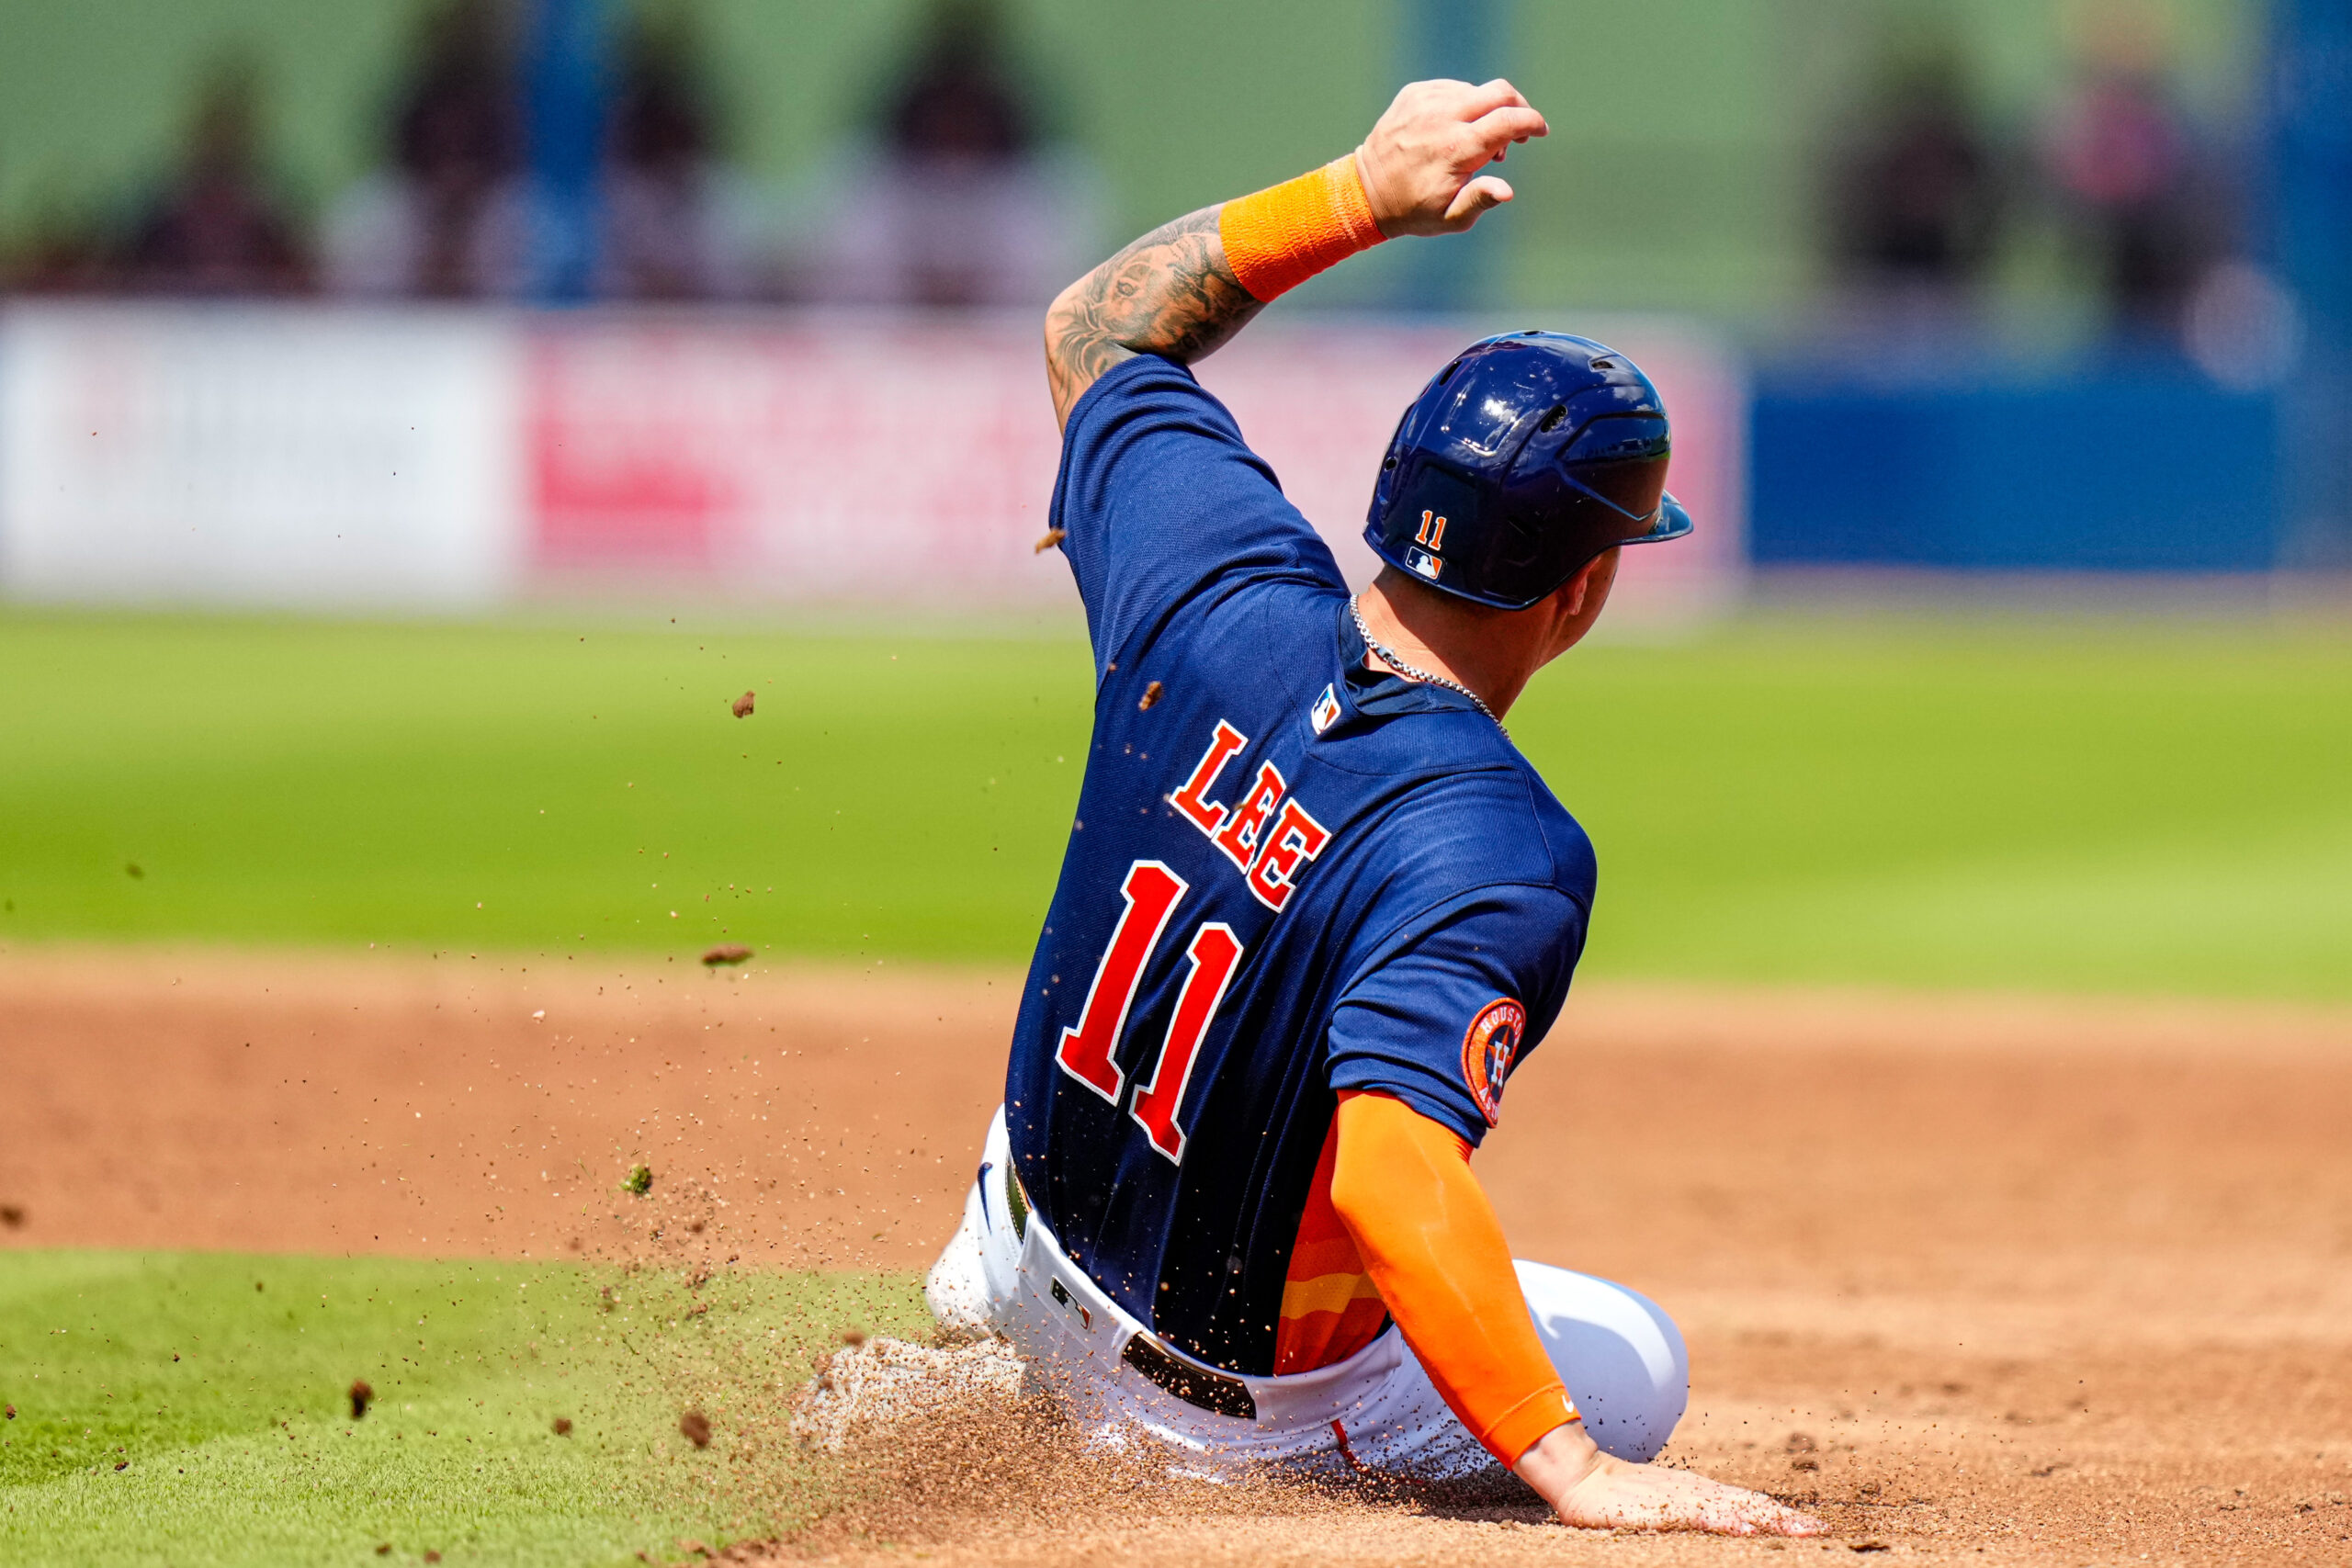 See what Houston Astros spring training looked like through the years